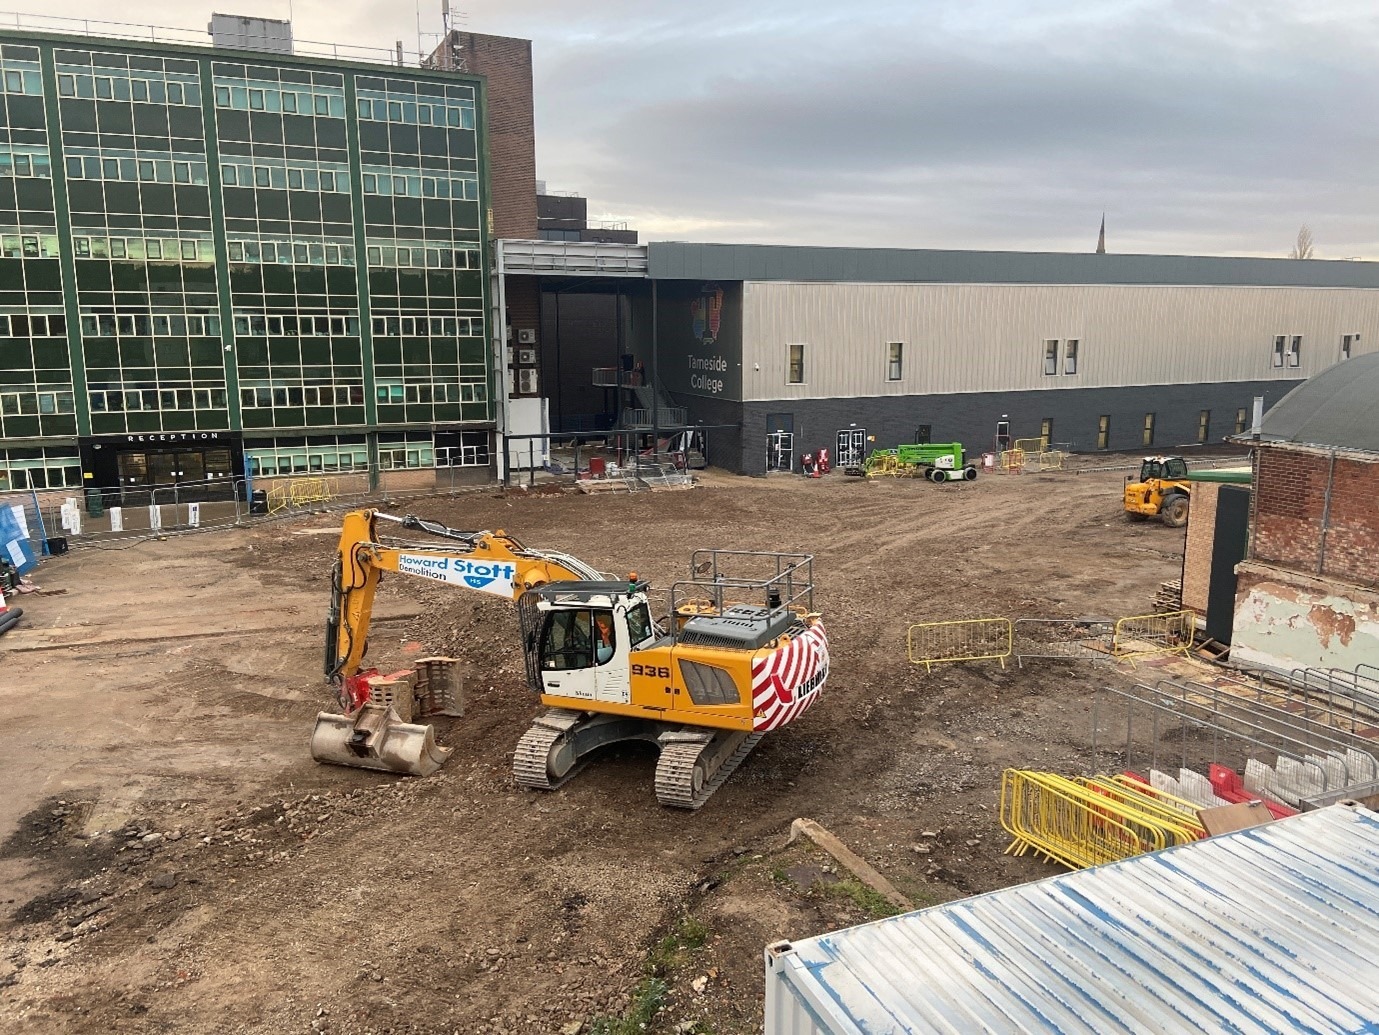 Construction of the Tameside College Construction Skills Centre